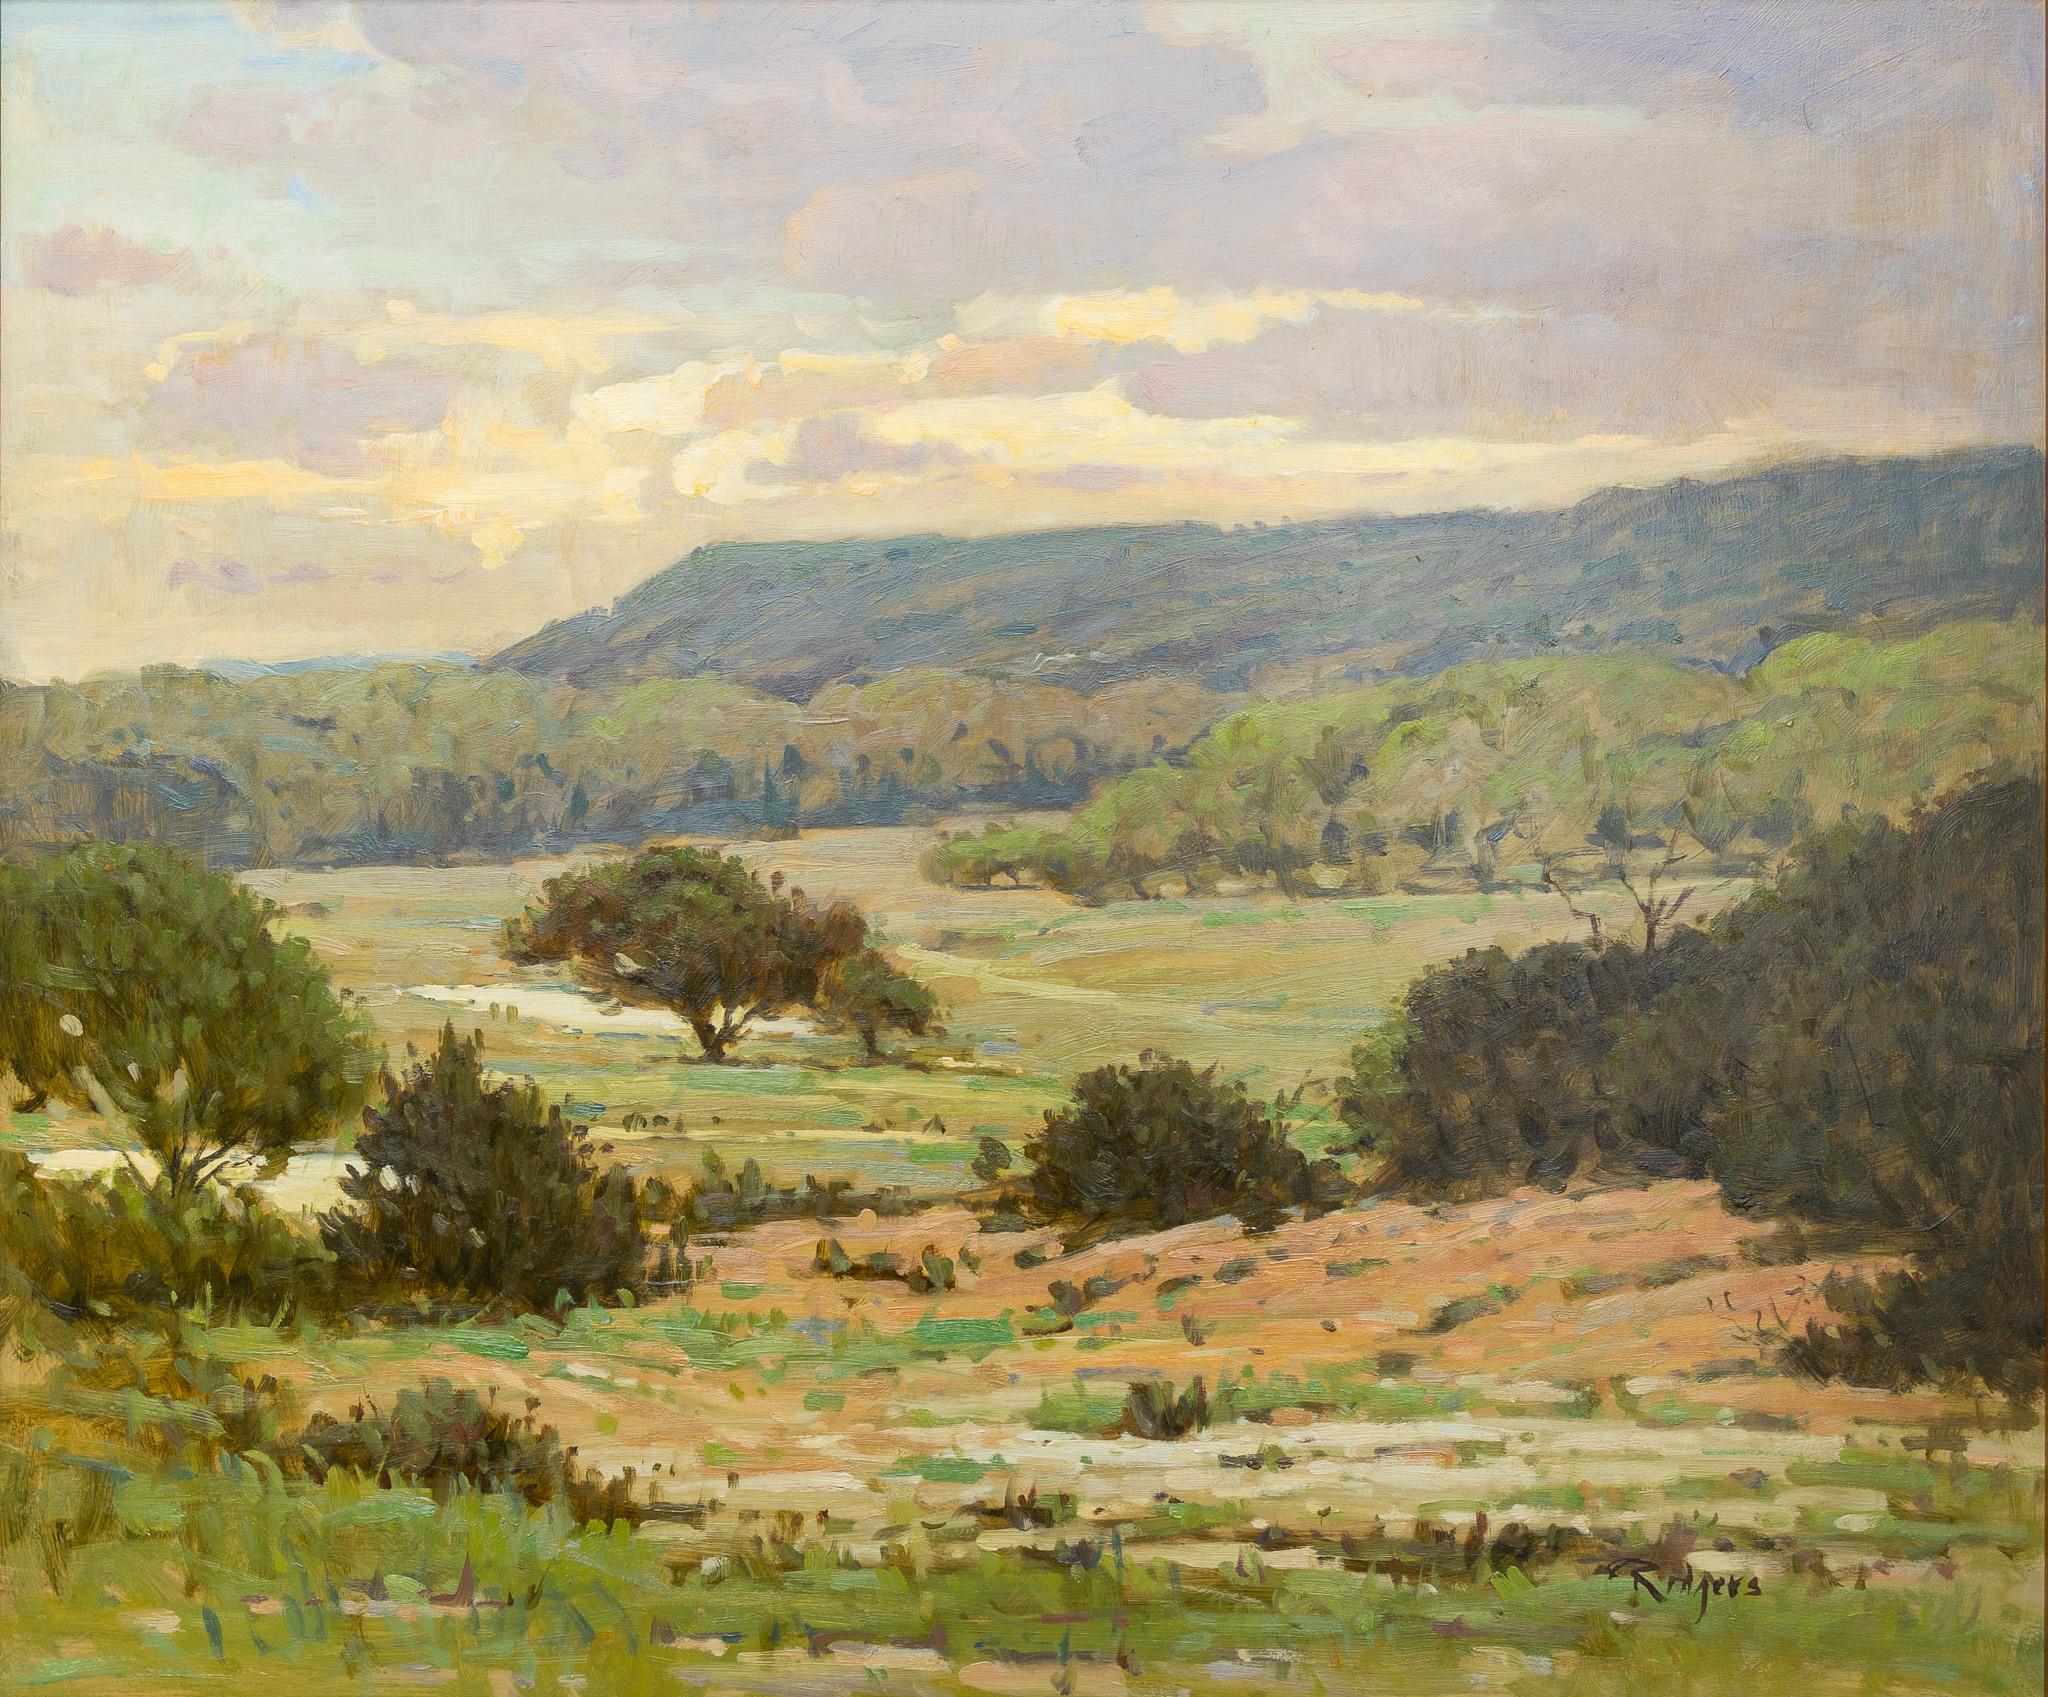 Jim Rodgers Landscape Painting - "Morning in the Hill Country" Texas Landscape